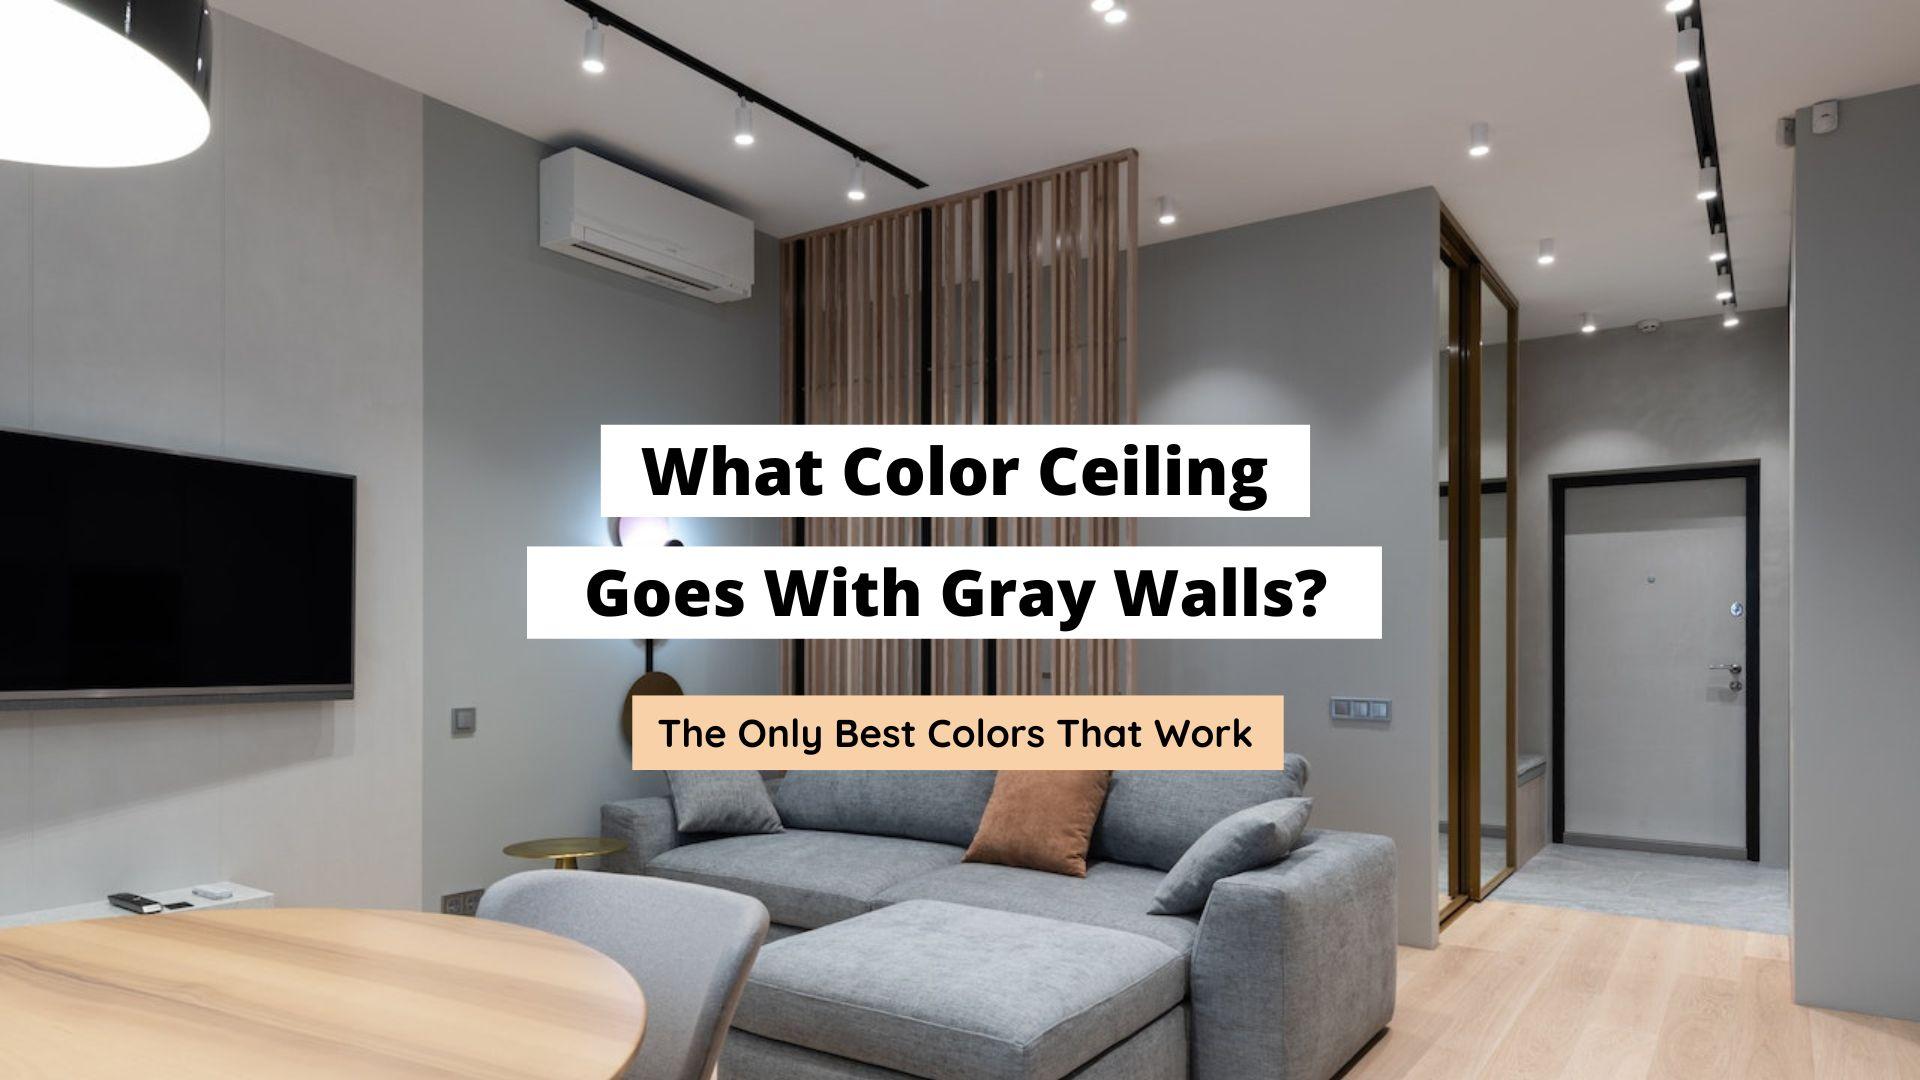 What Color Ceiling Goes With Gray Walls